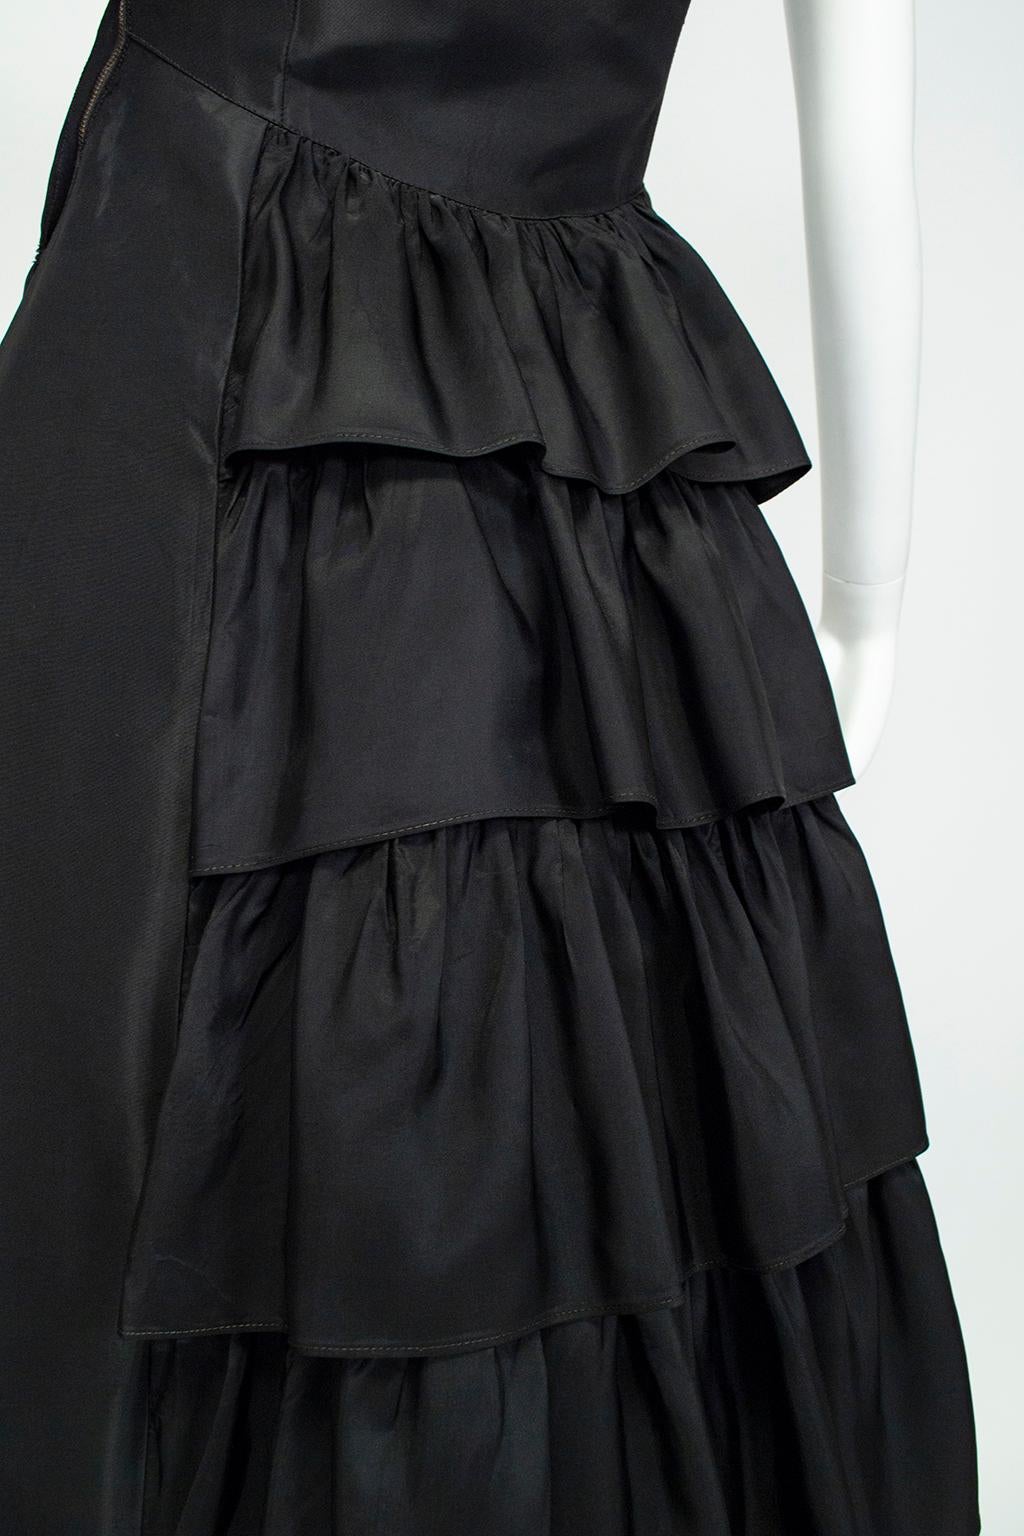 Black Adrian-Inspired Hollywood Regency Gown w Cascading Ruffle Back – XS, 1930s For Sale 2